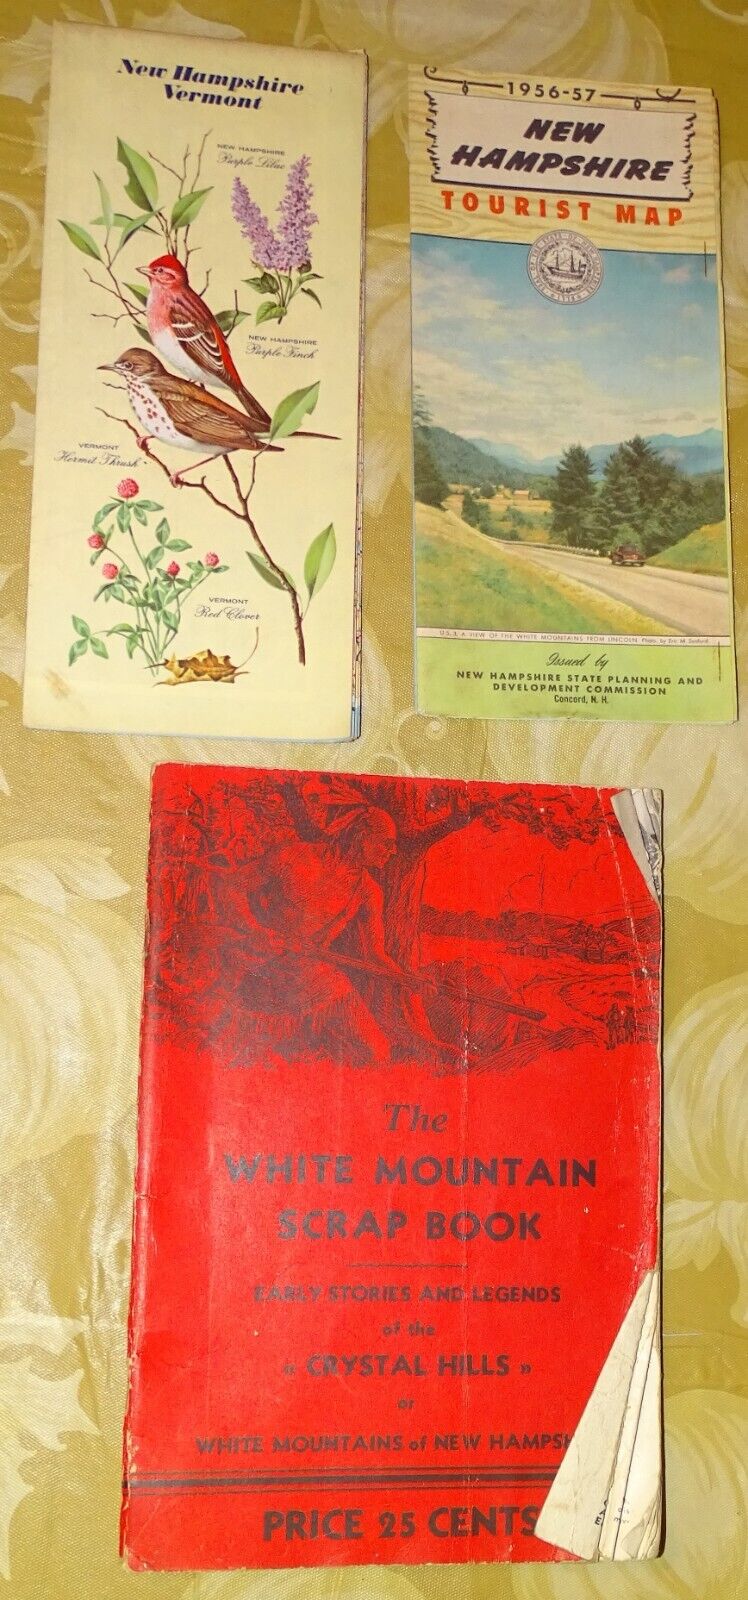 1939 White Mountain Scrap Book (stories) & 1956 New Hampshire Map, etc.